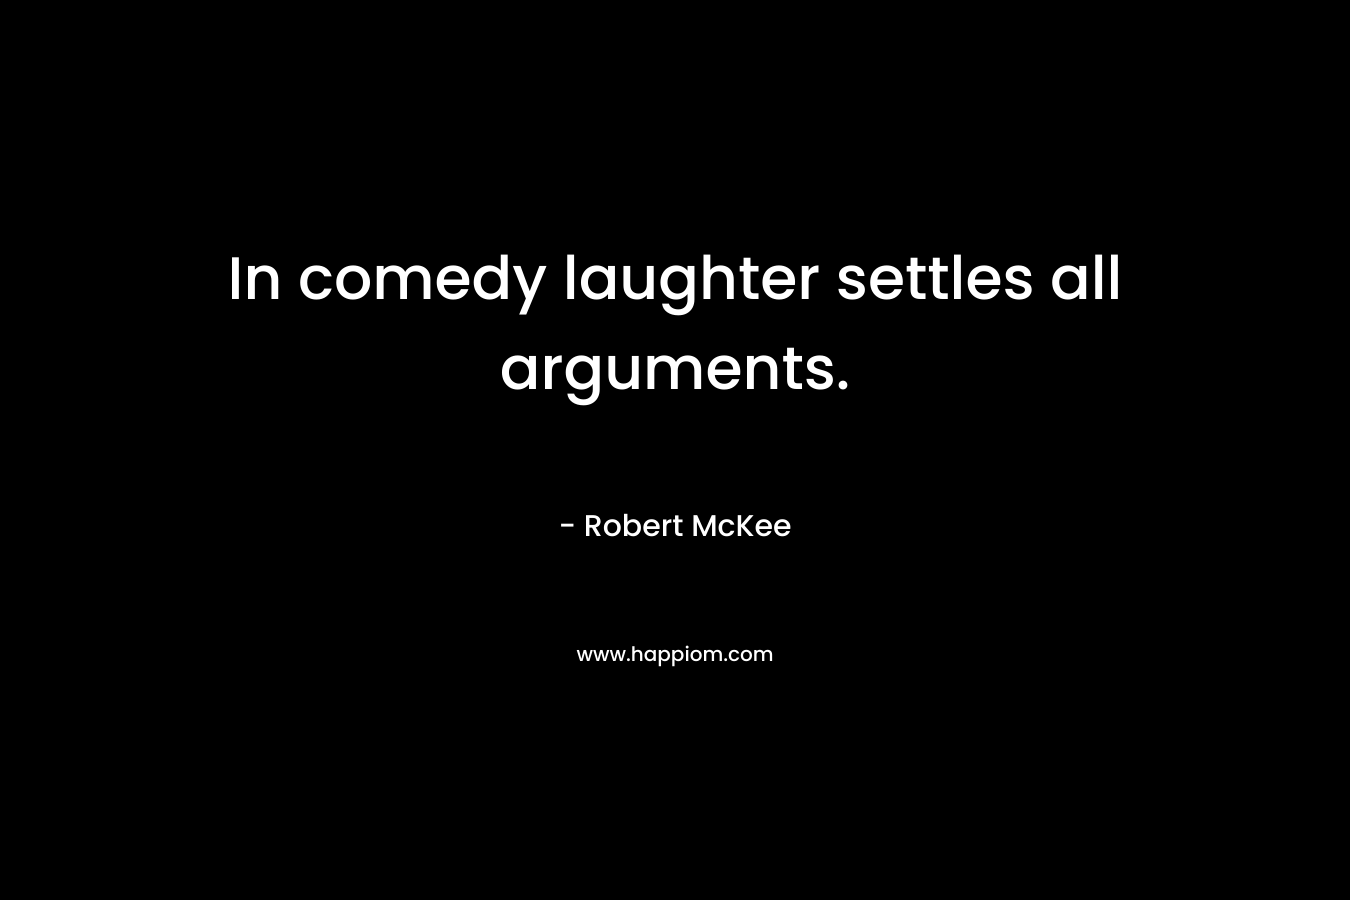 In comedy laughter settles all arguments.